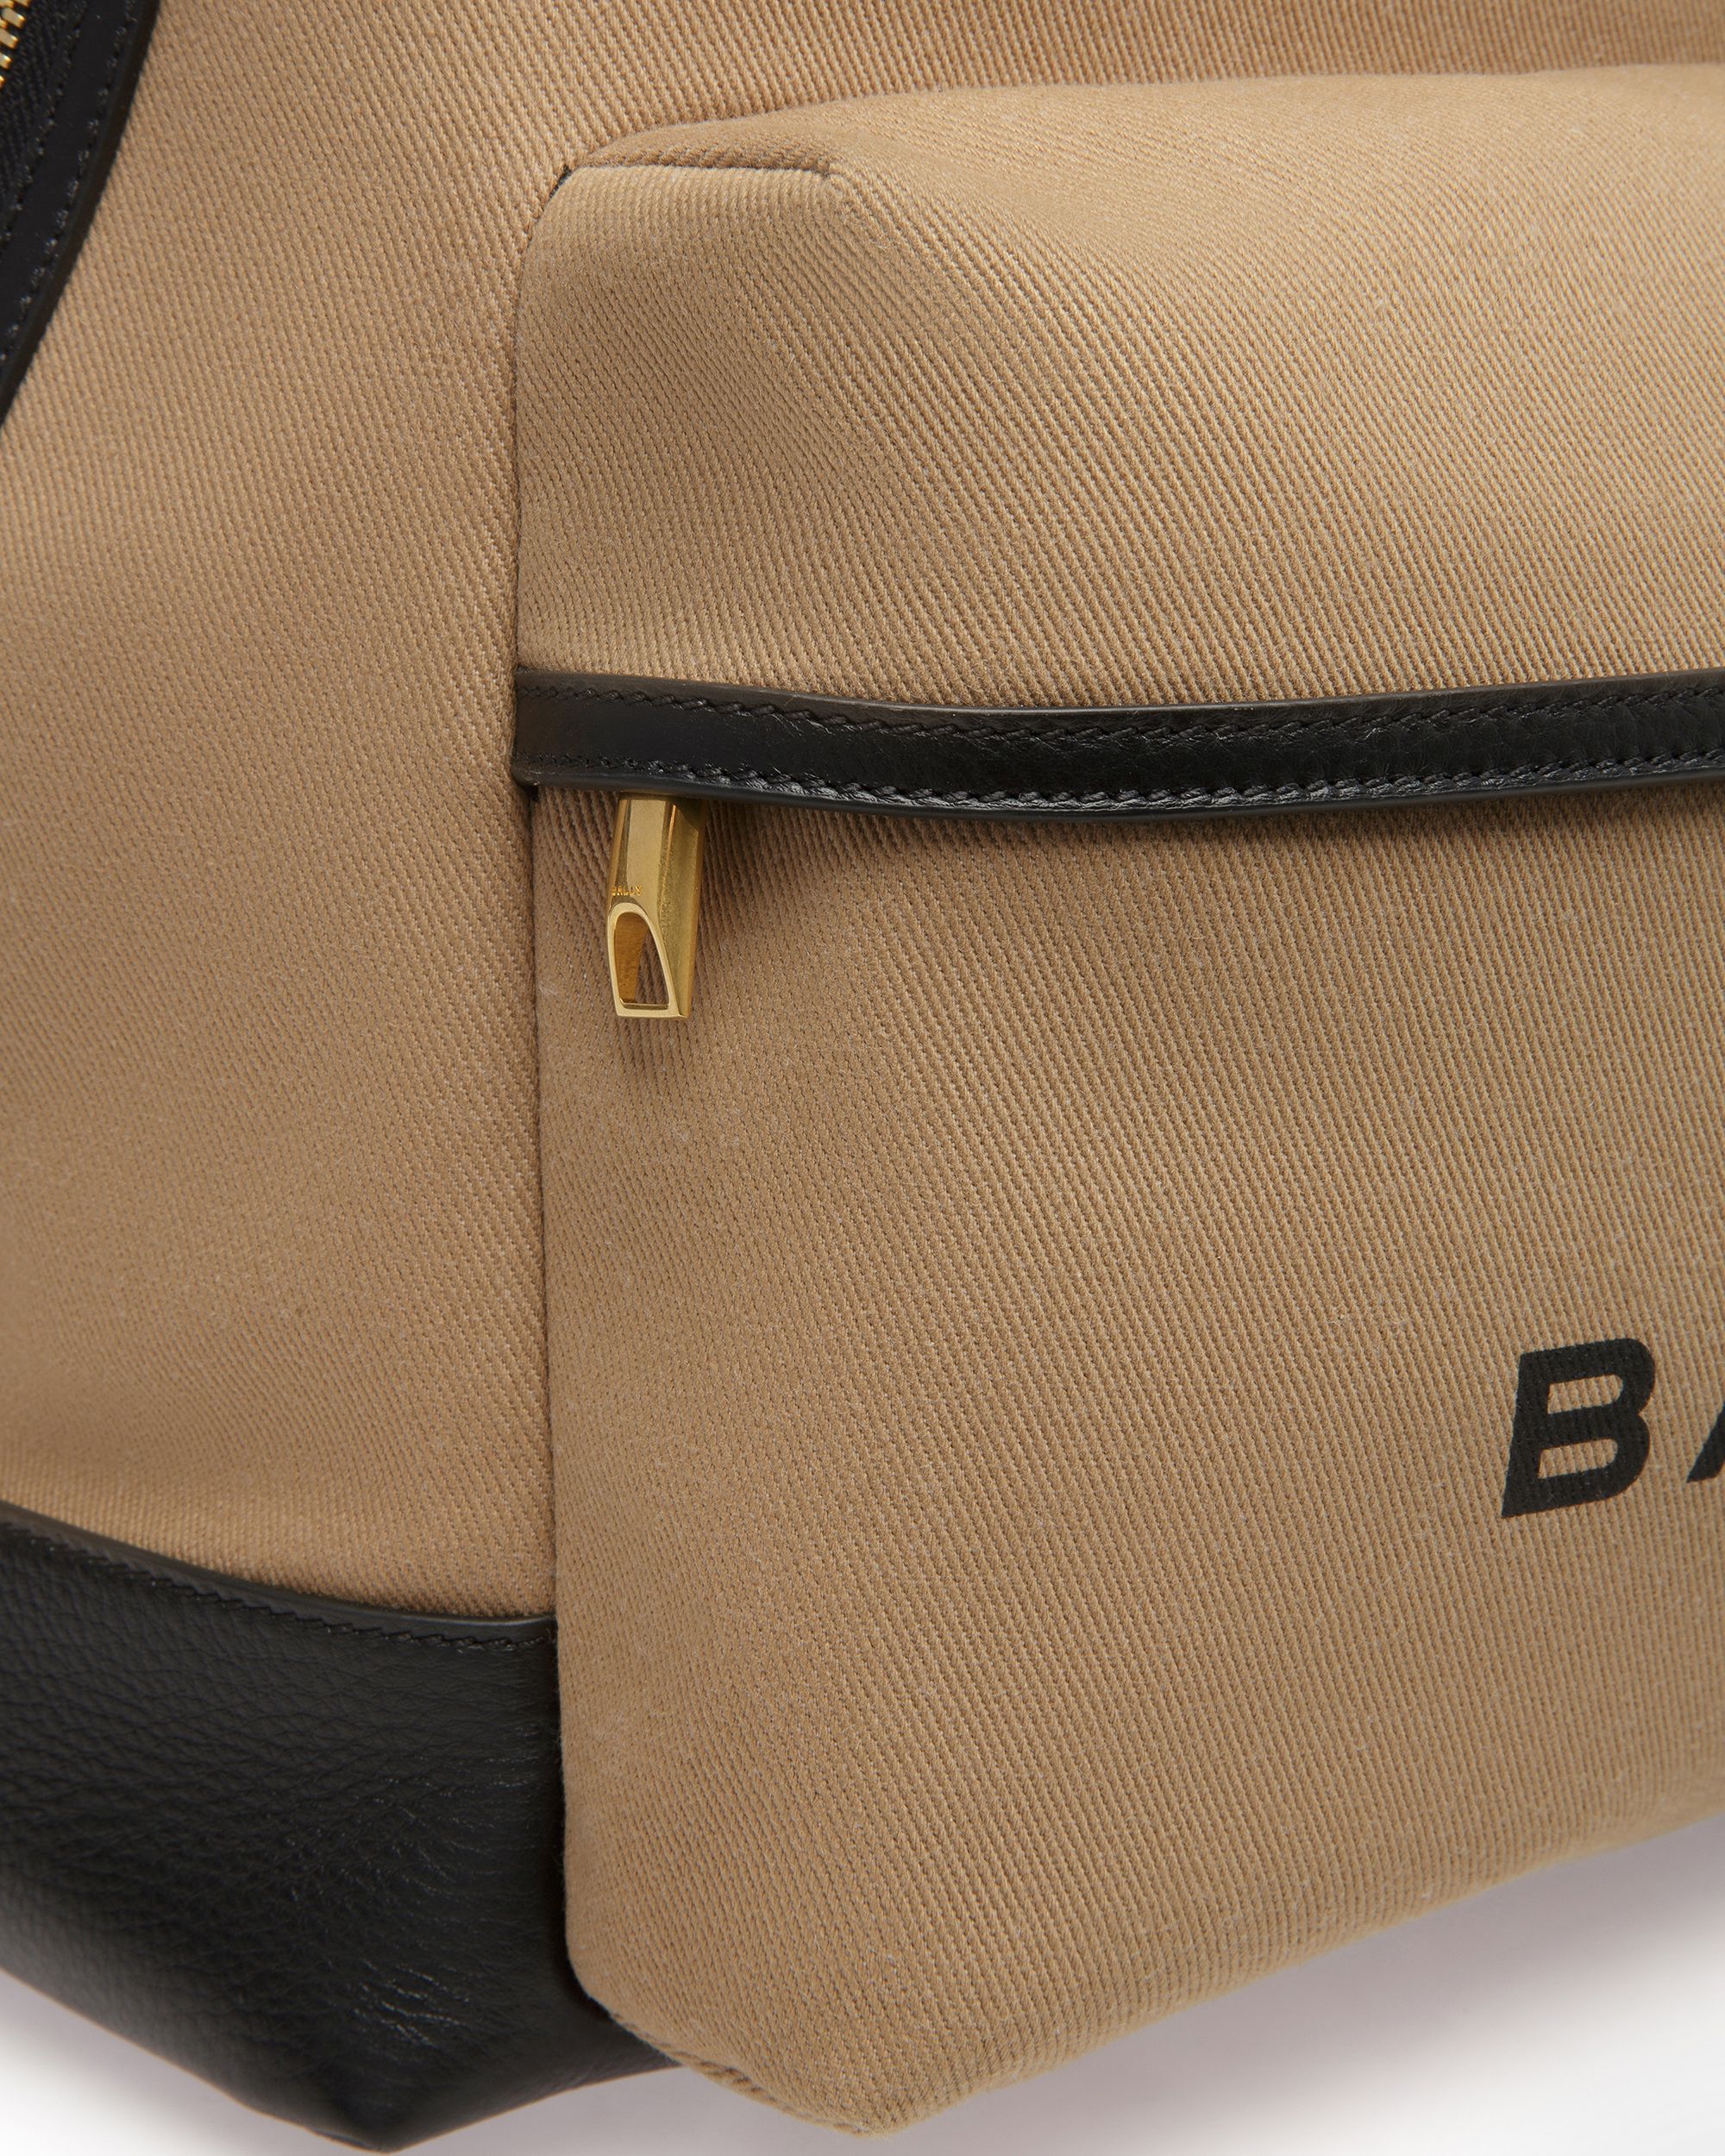 Treck | Men's Backpack | Sand And Black Fabric And Leather | Bally | Still Life Detail